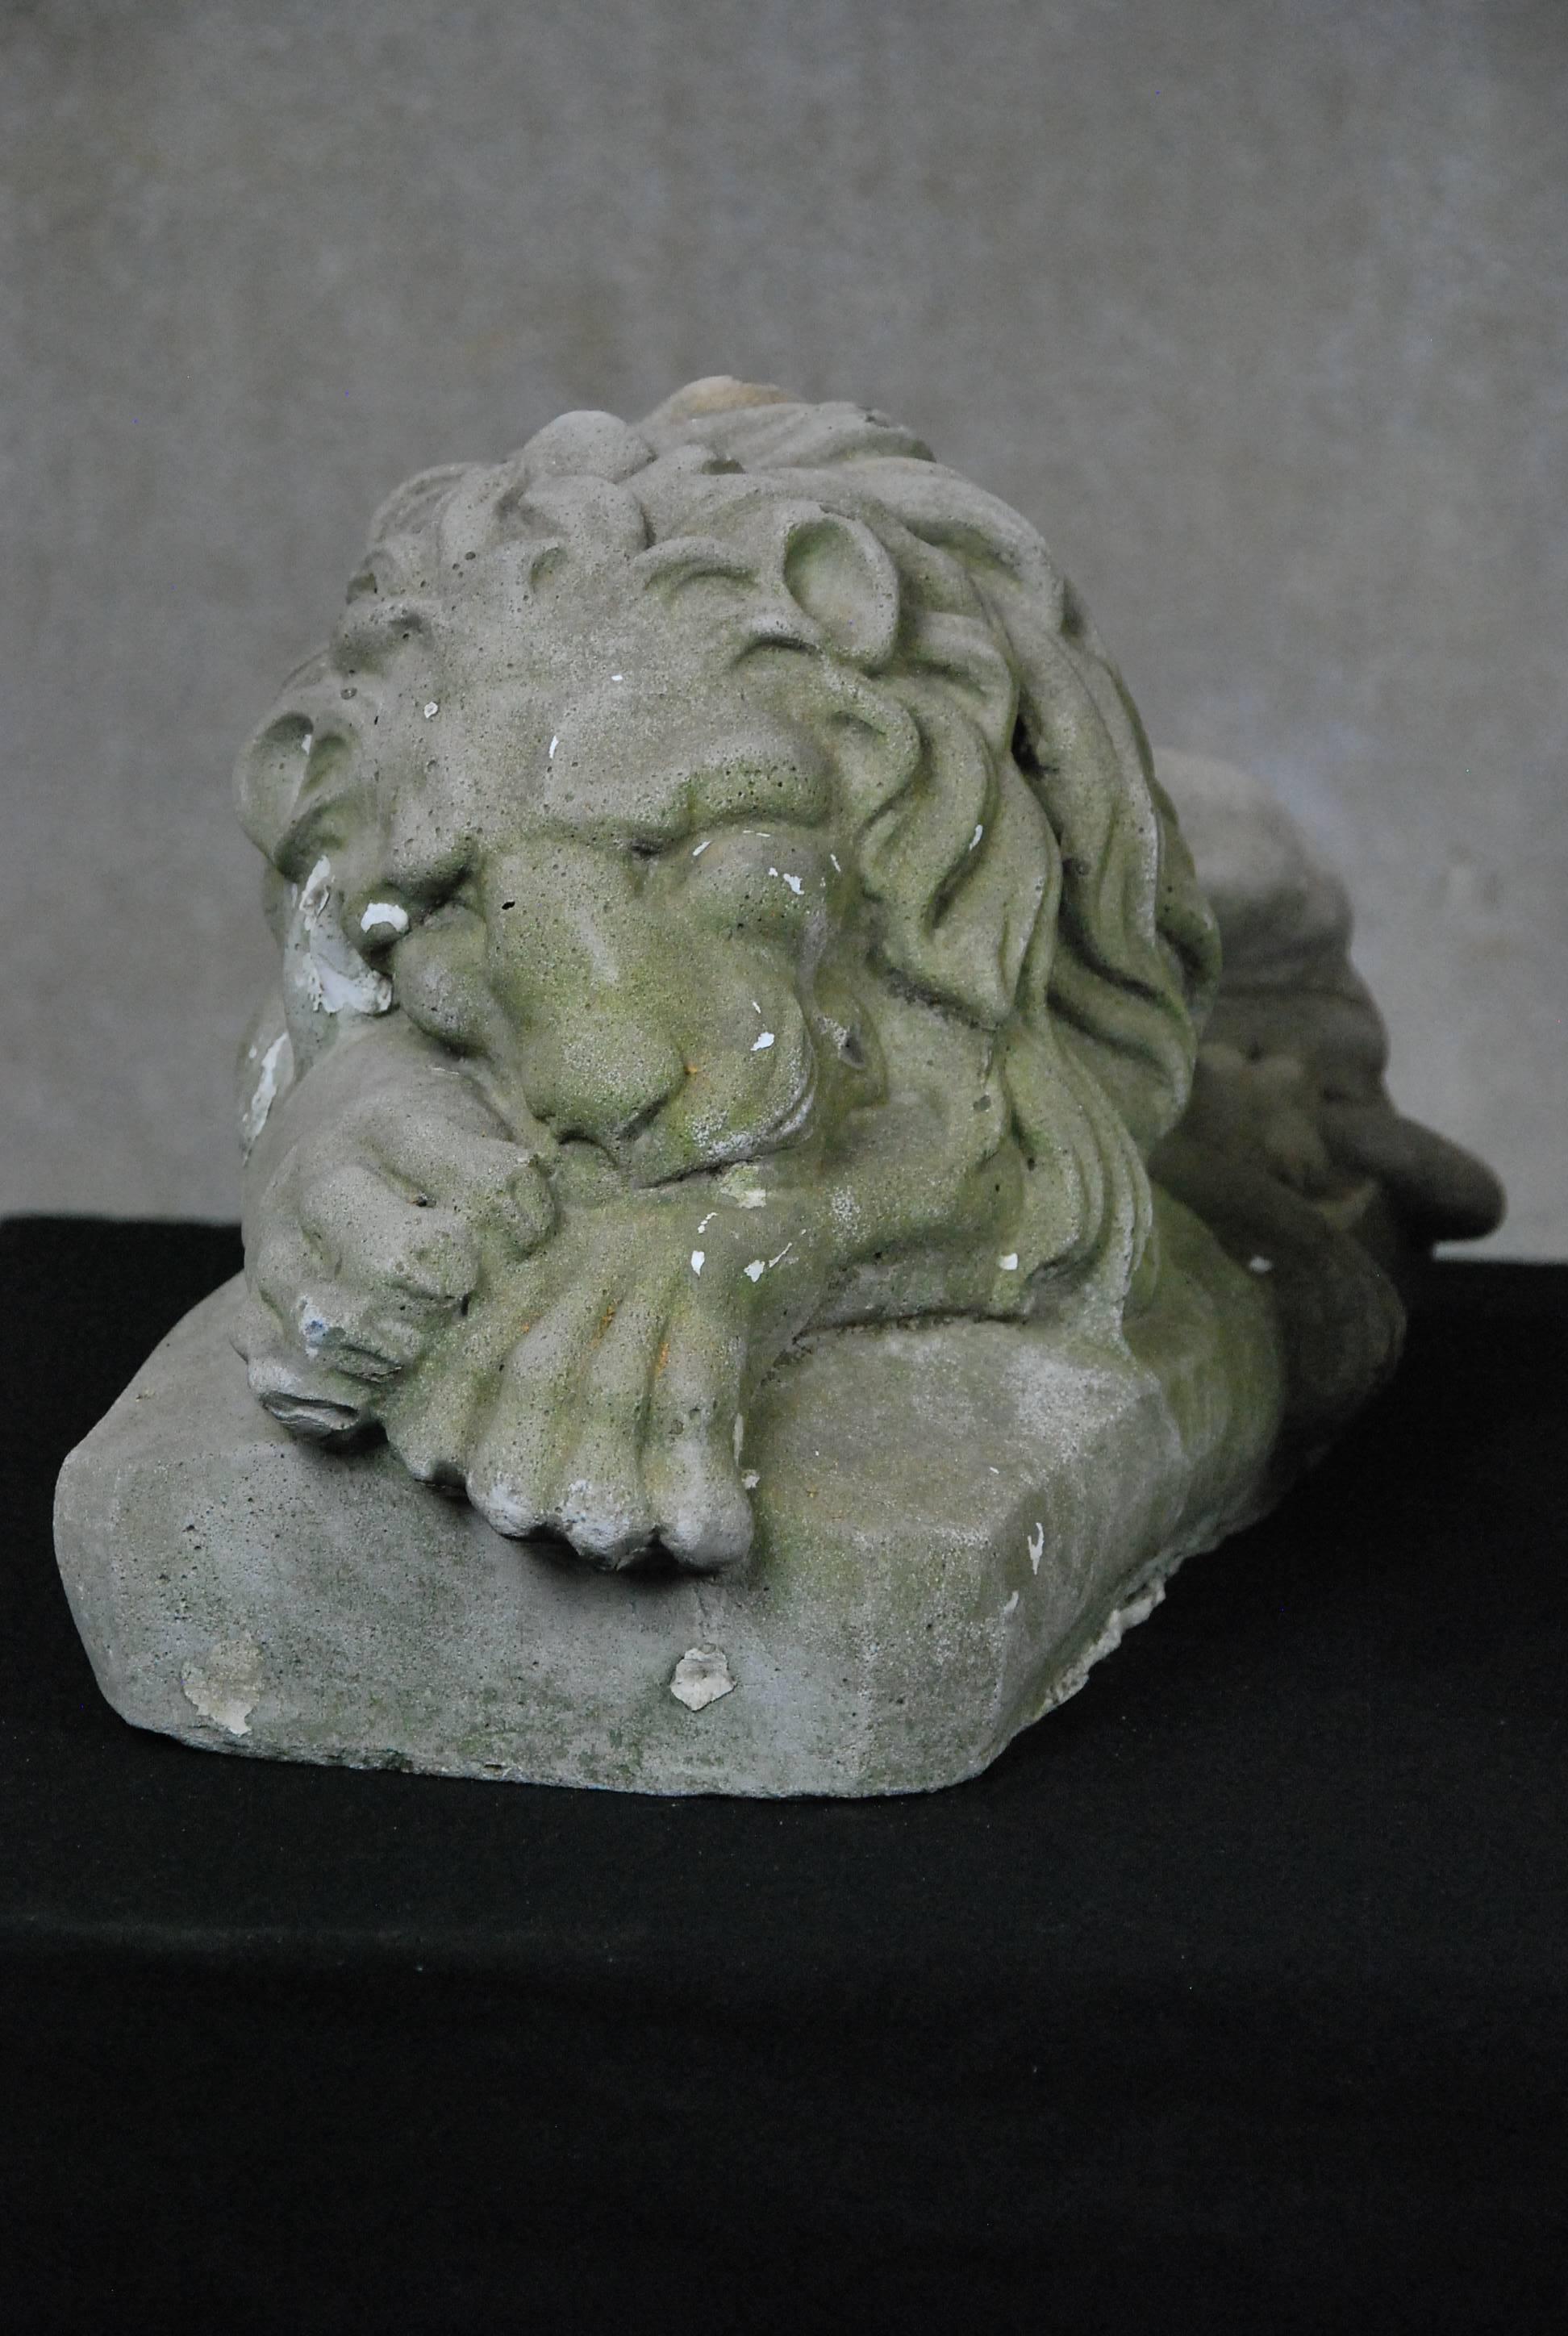 A pair of cast lions salvaged from an early home in Mid West USA.

Some traces of old paint remain.